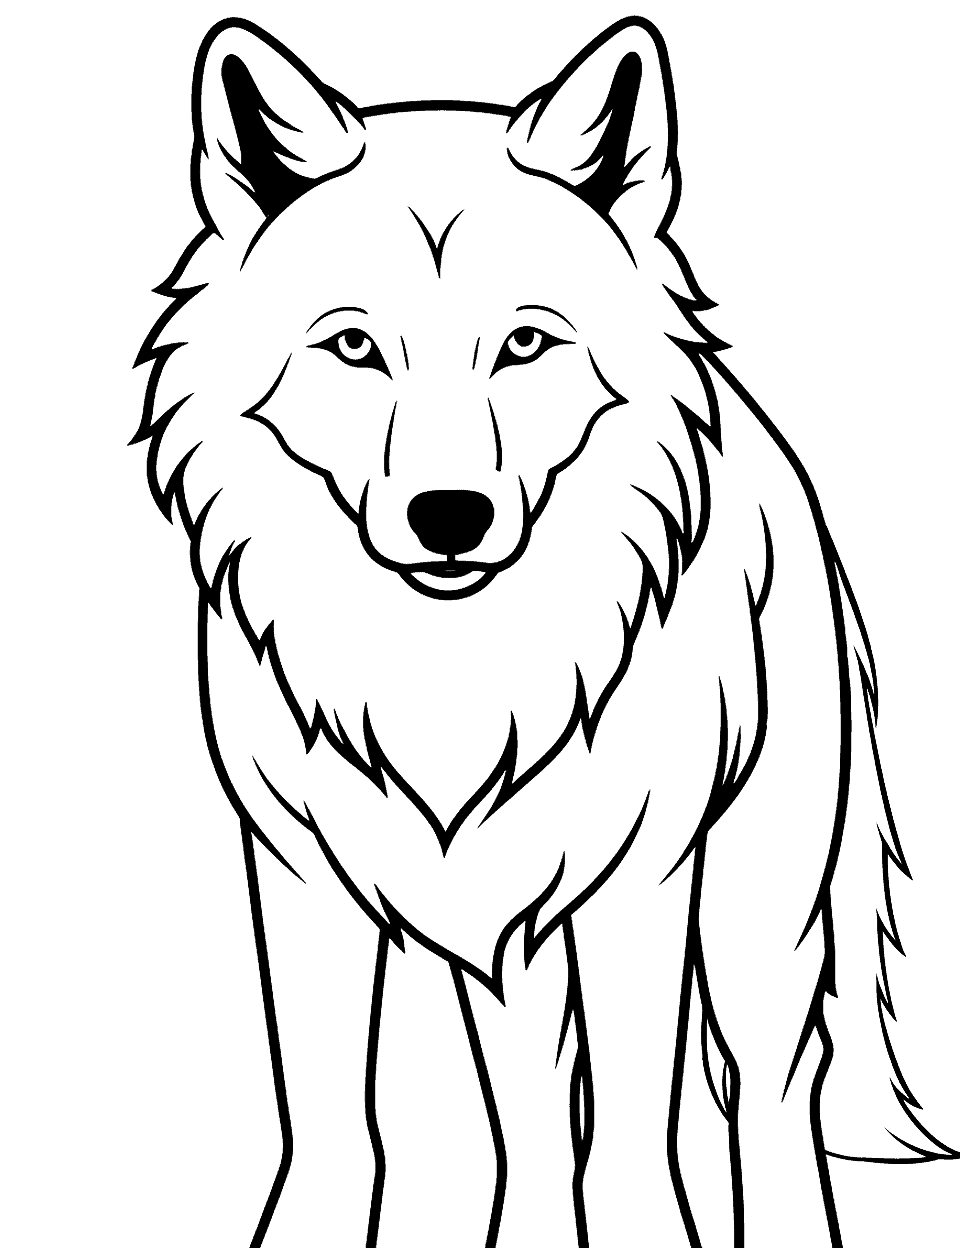 Easy Wolf Sketch Coloring Page - A simple and easy-to-color drawing of a wolf’s face, perfect for beginners.